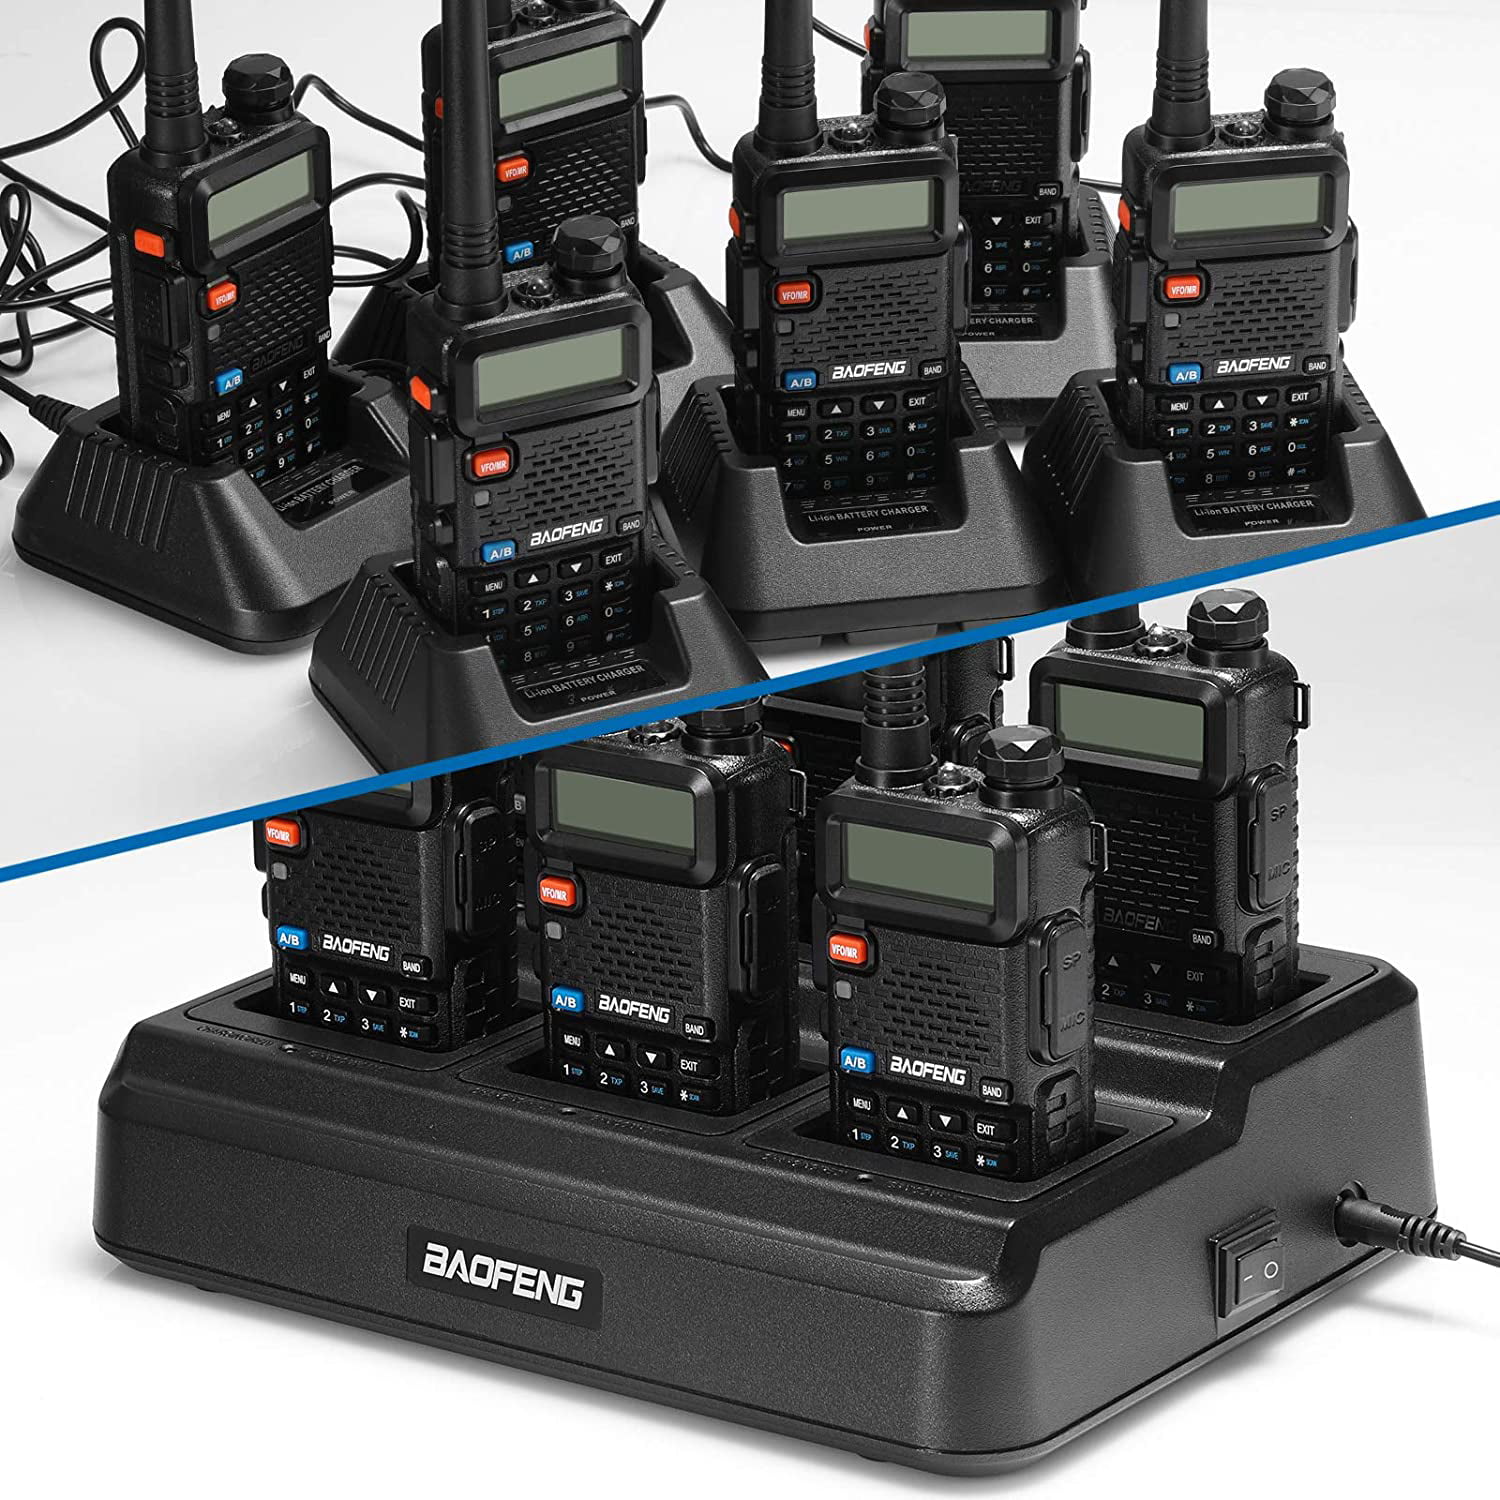 BAOFENG UV-5R Six Way Charger Multi Unit Charger Station for BF-F8HP UV-5R+  UV-5RE UV-5RTP UV-5X3 Walkie Talkie and Battery, 1Pack